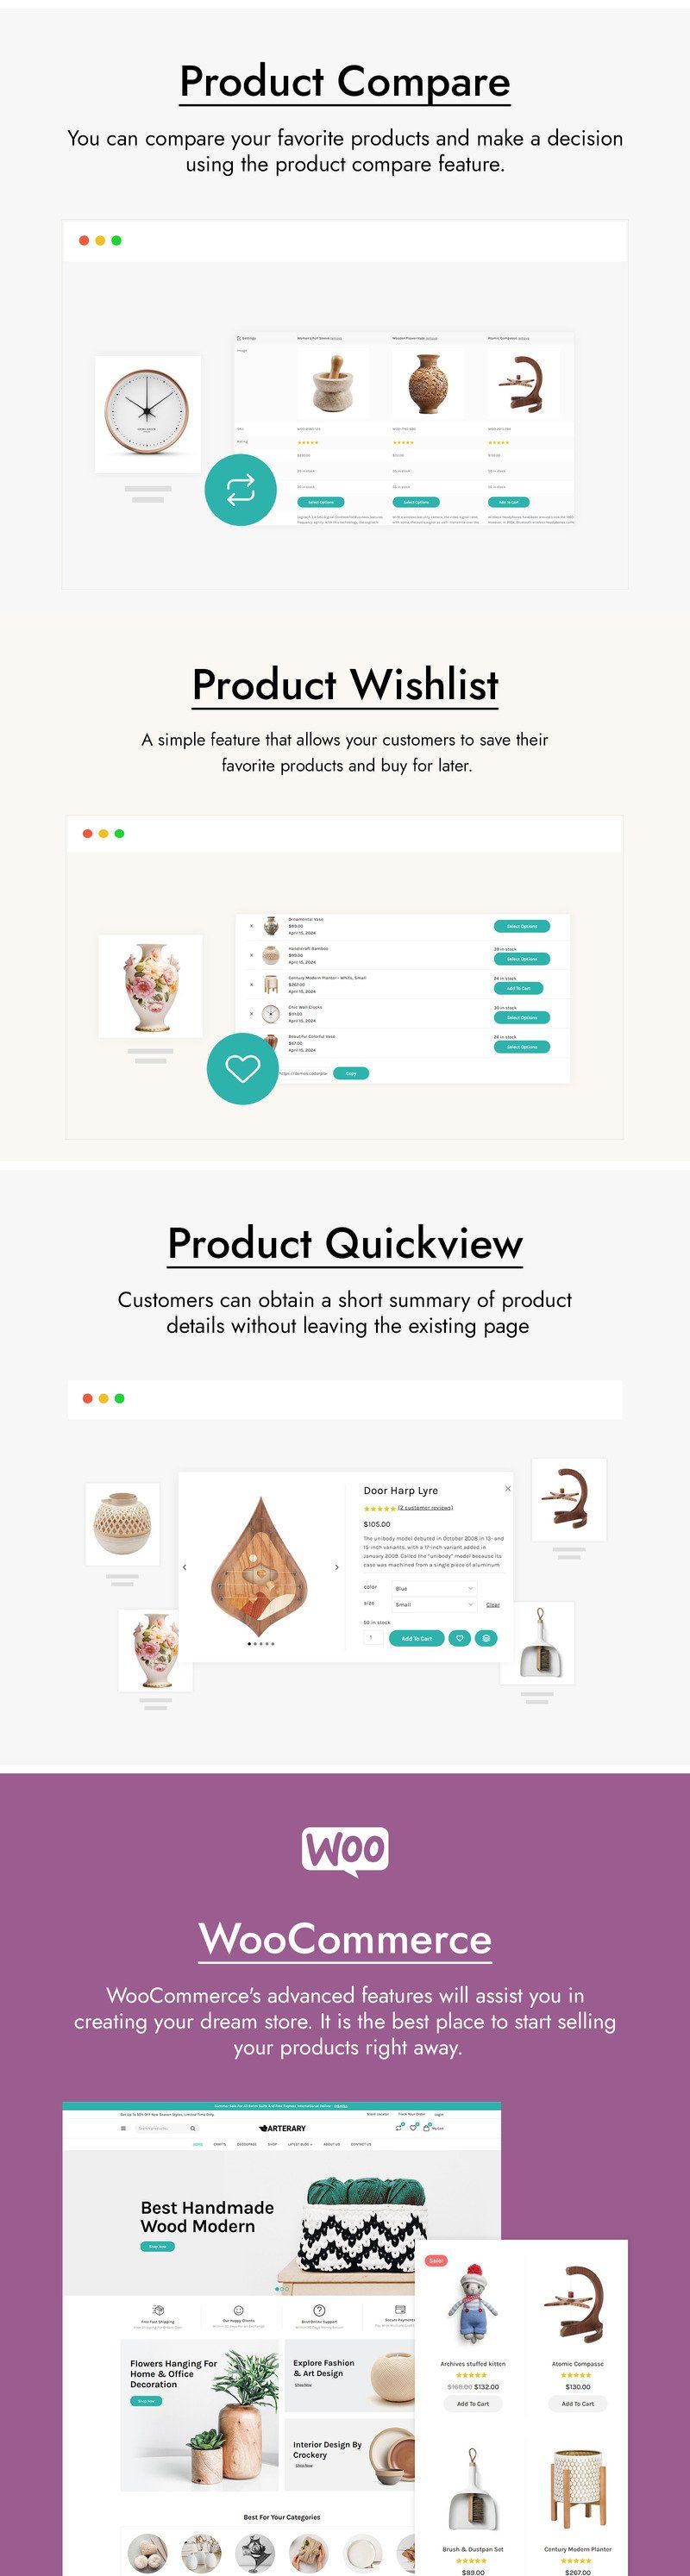 Arterary - Home Decor, Handicraft, Ceramic Artist and Poultry Farm WooCommerce Theme - Features Image 4